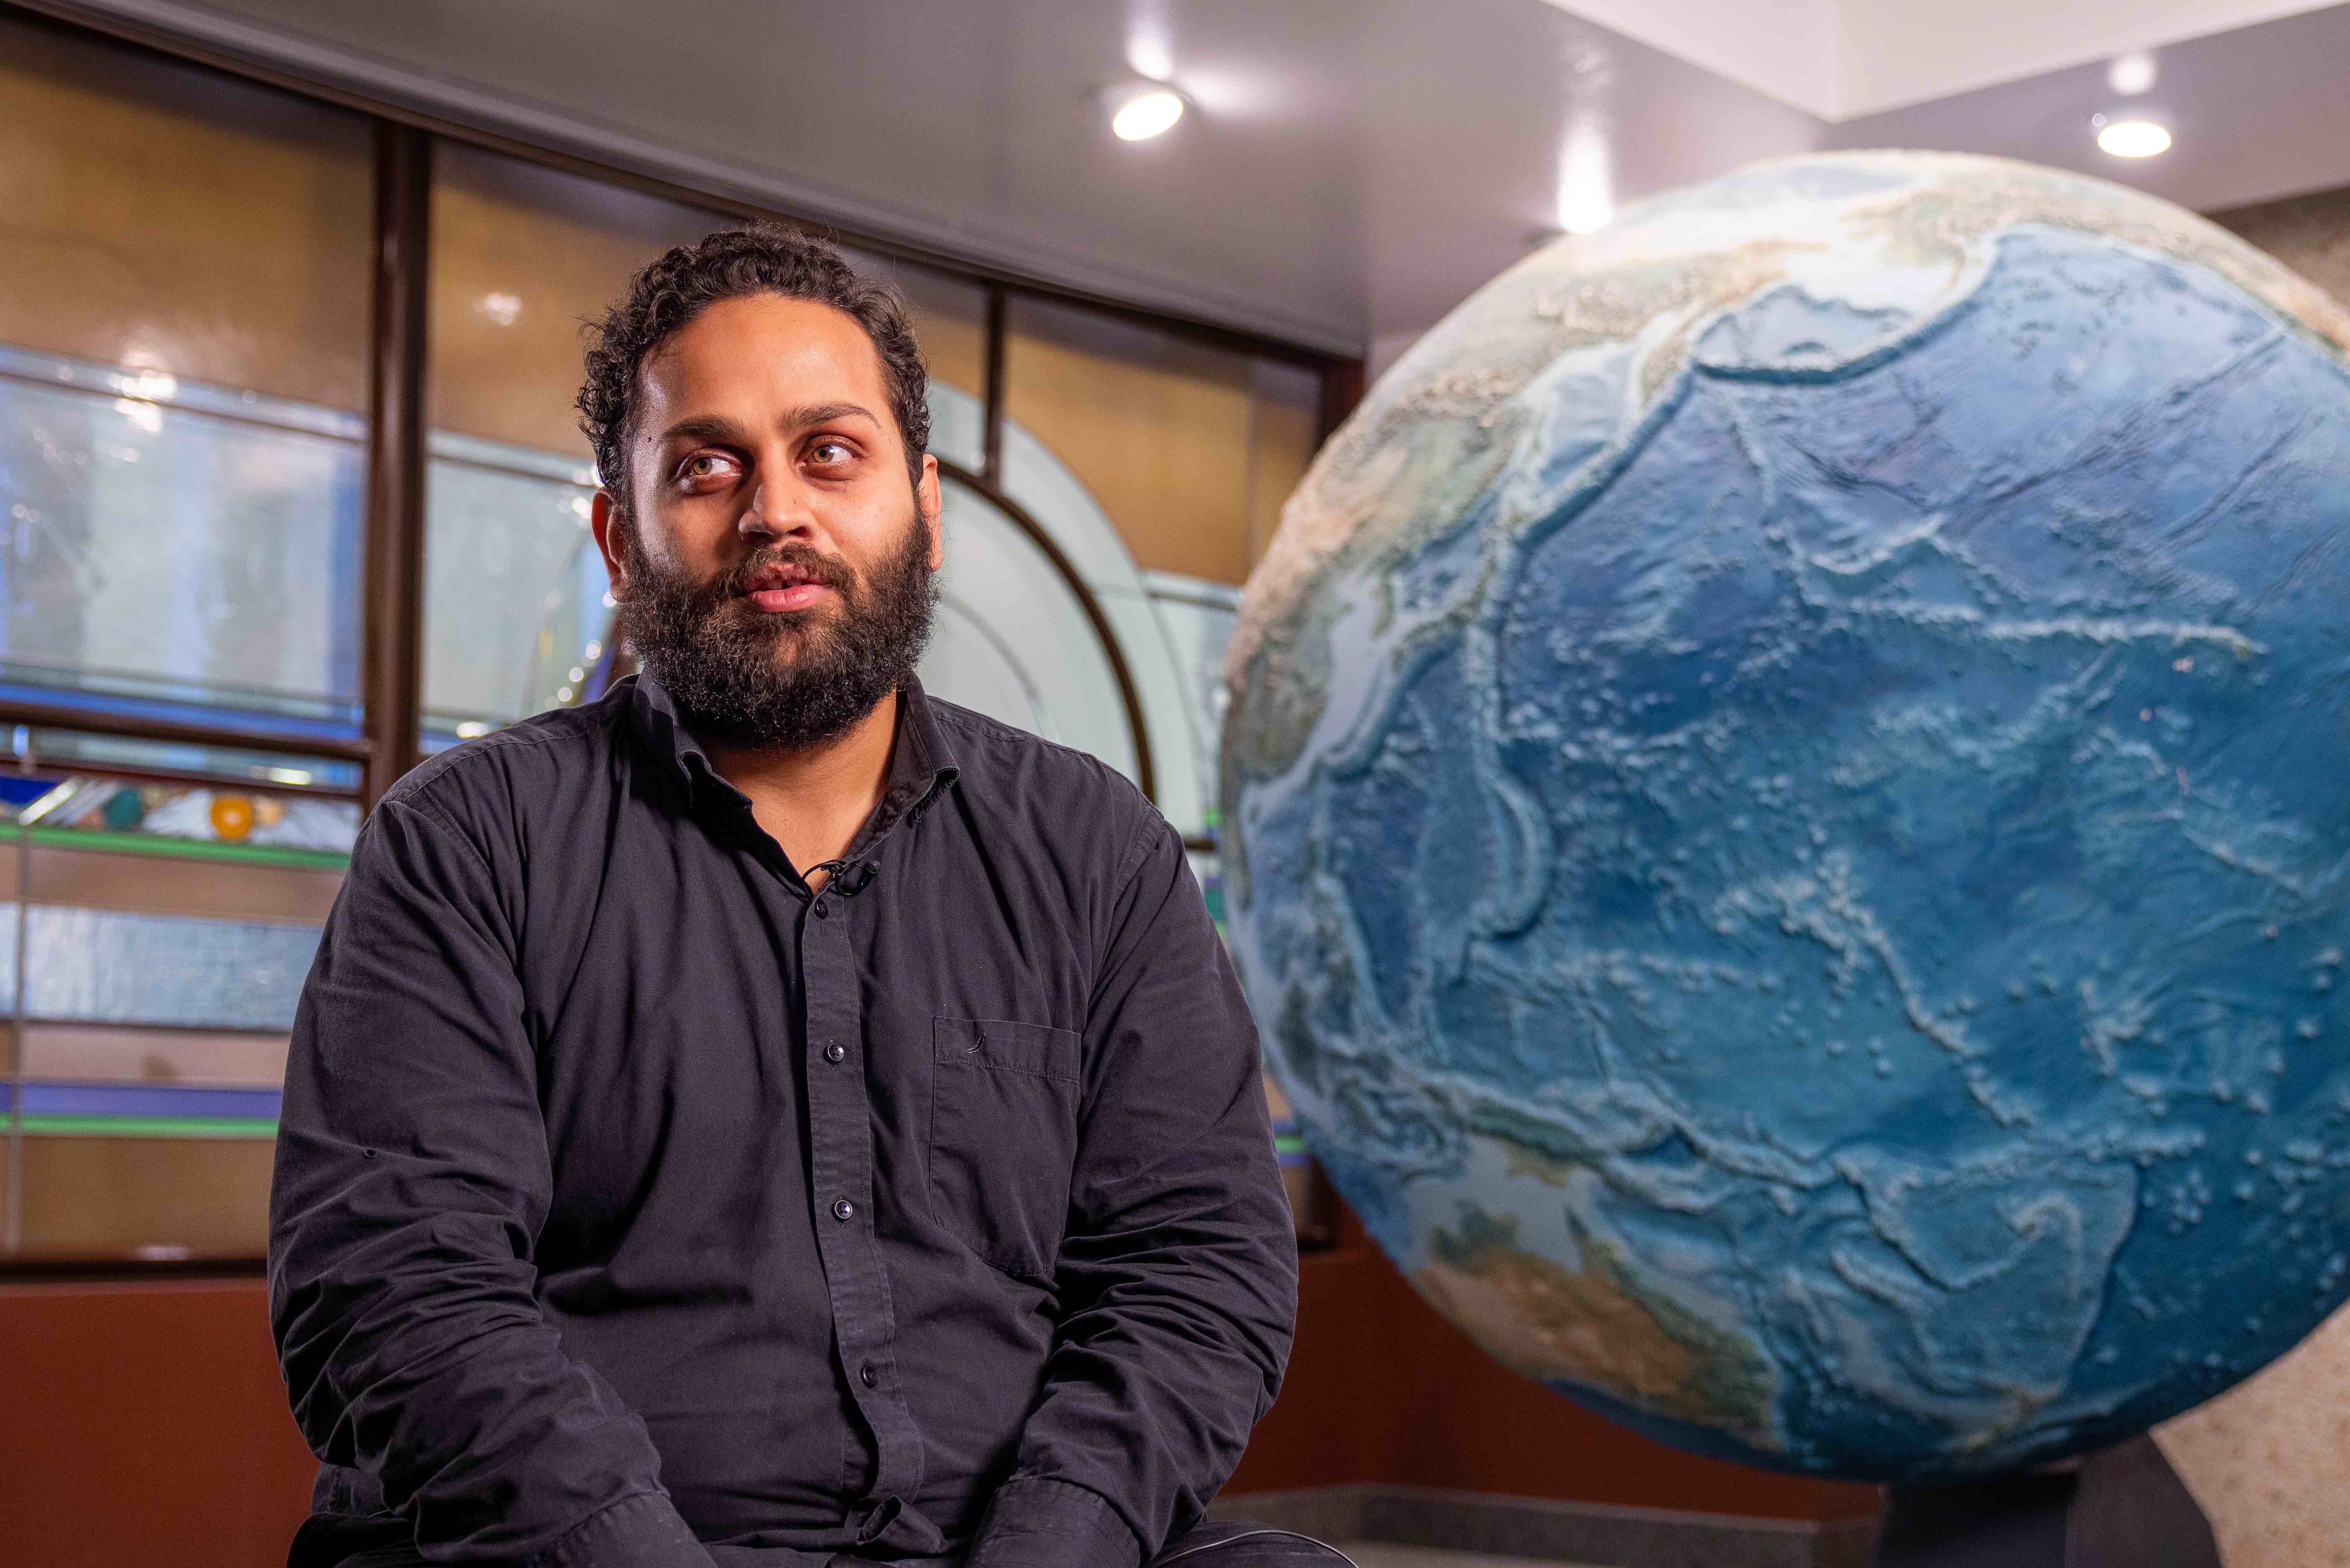 a man with dark hair and beard sits by a giant globe